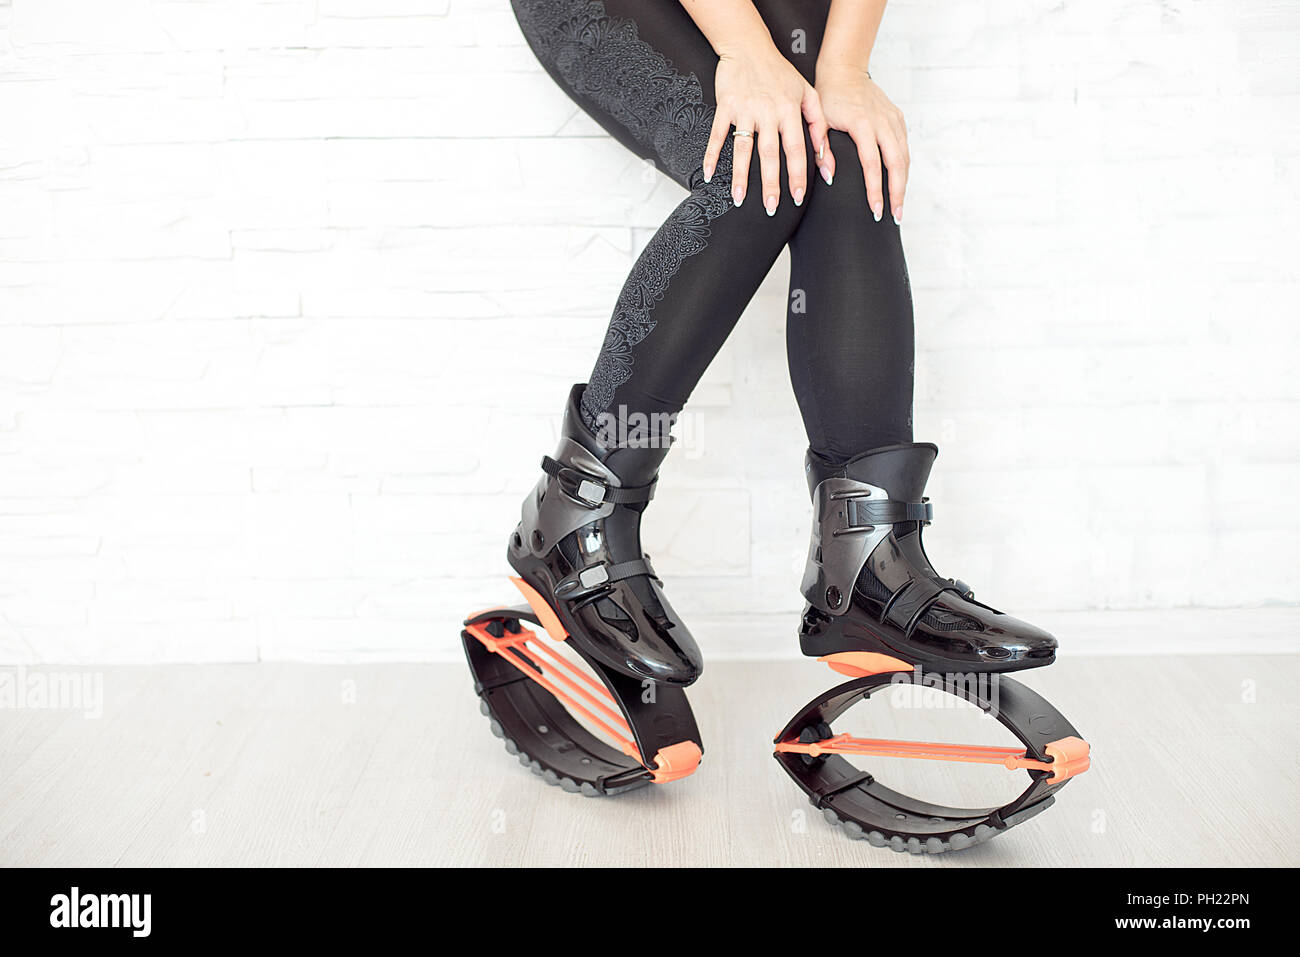 close-up in kangoo jumps boots indoors unrecognizable rear view Stock Photo  - Alamy